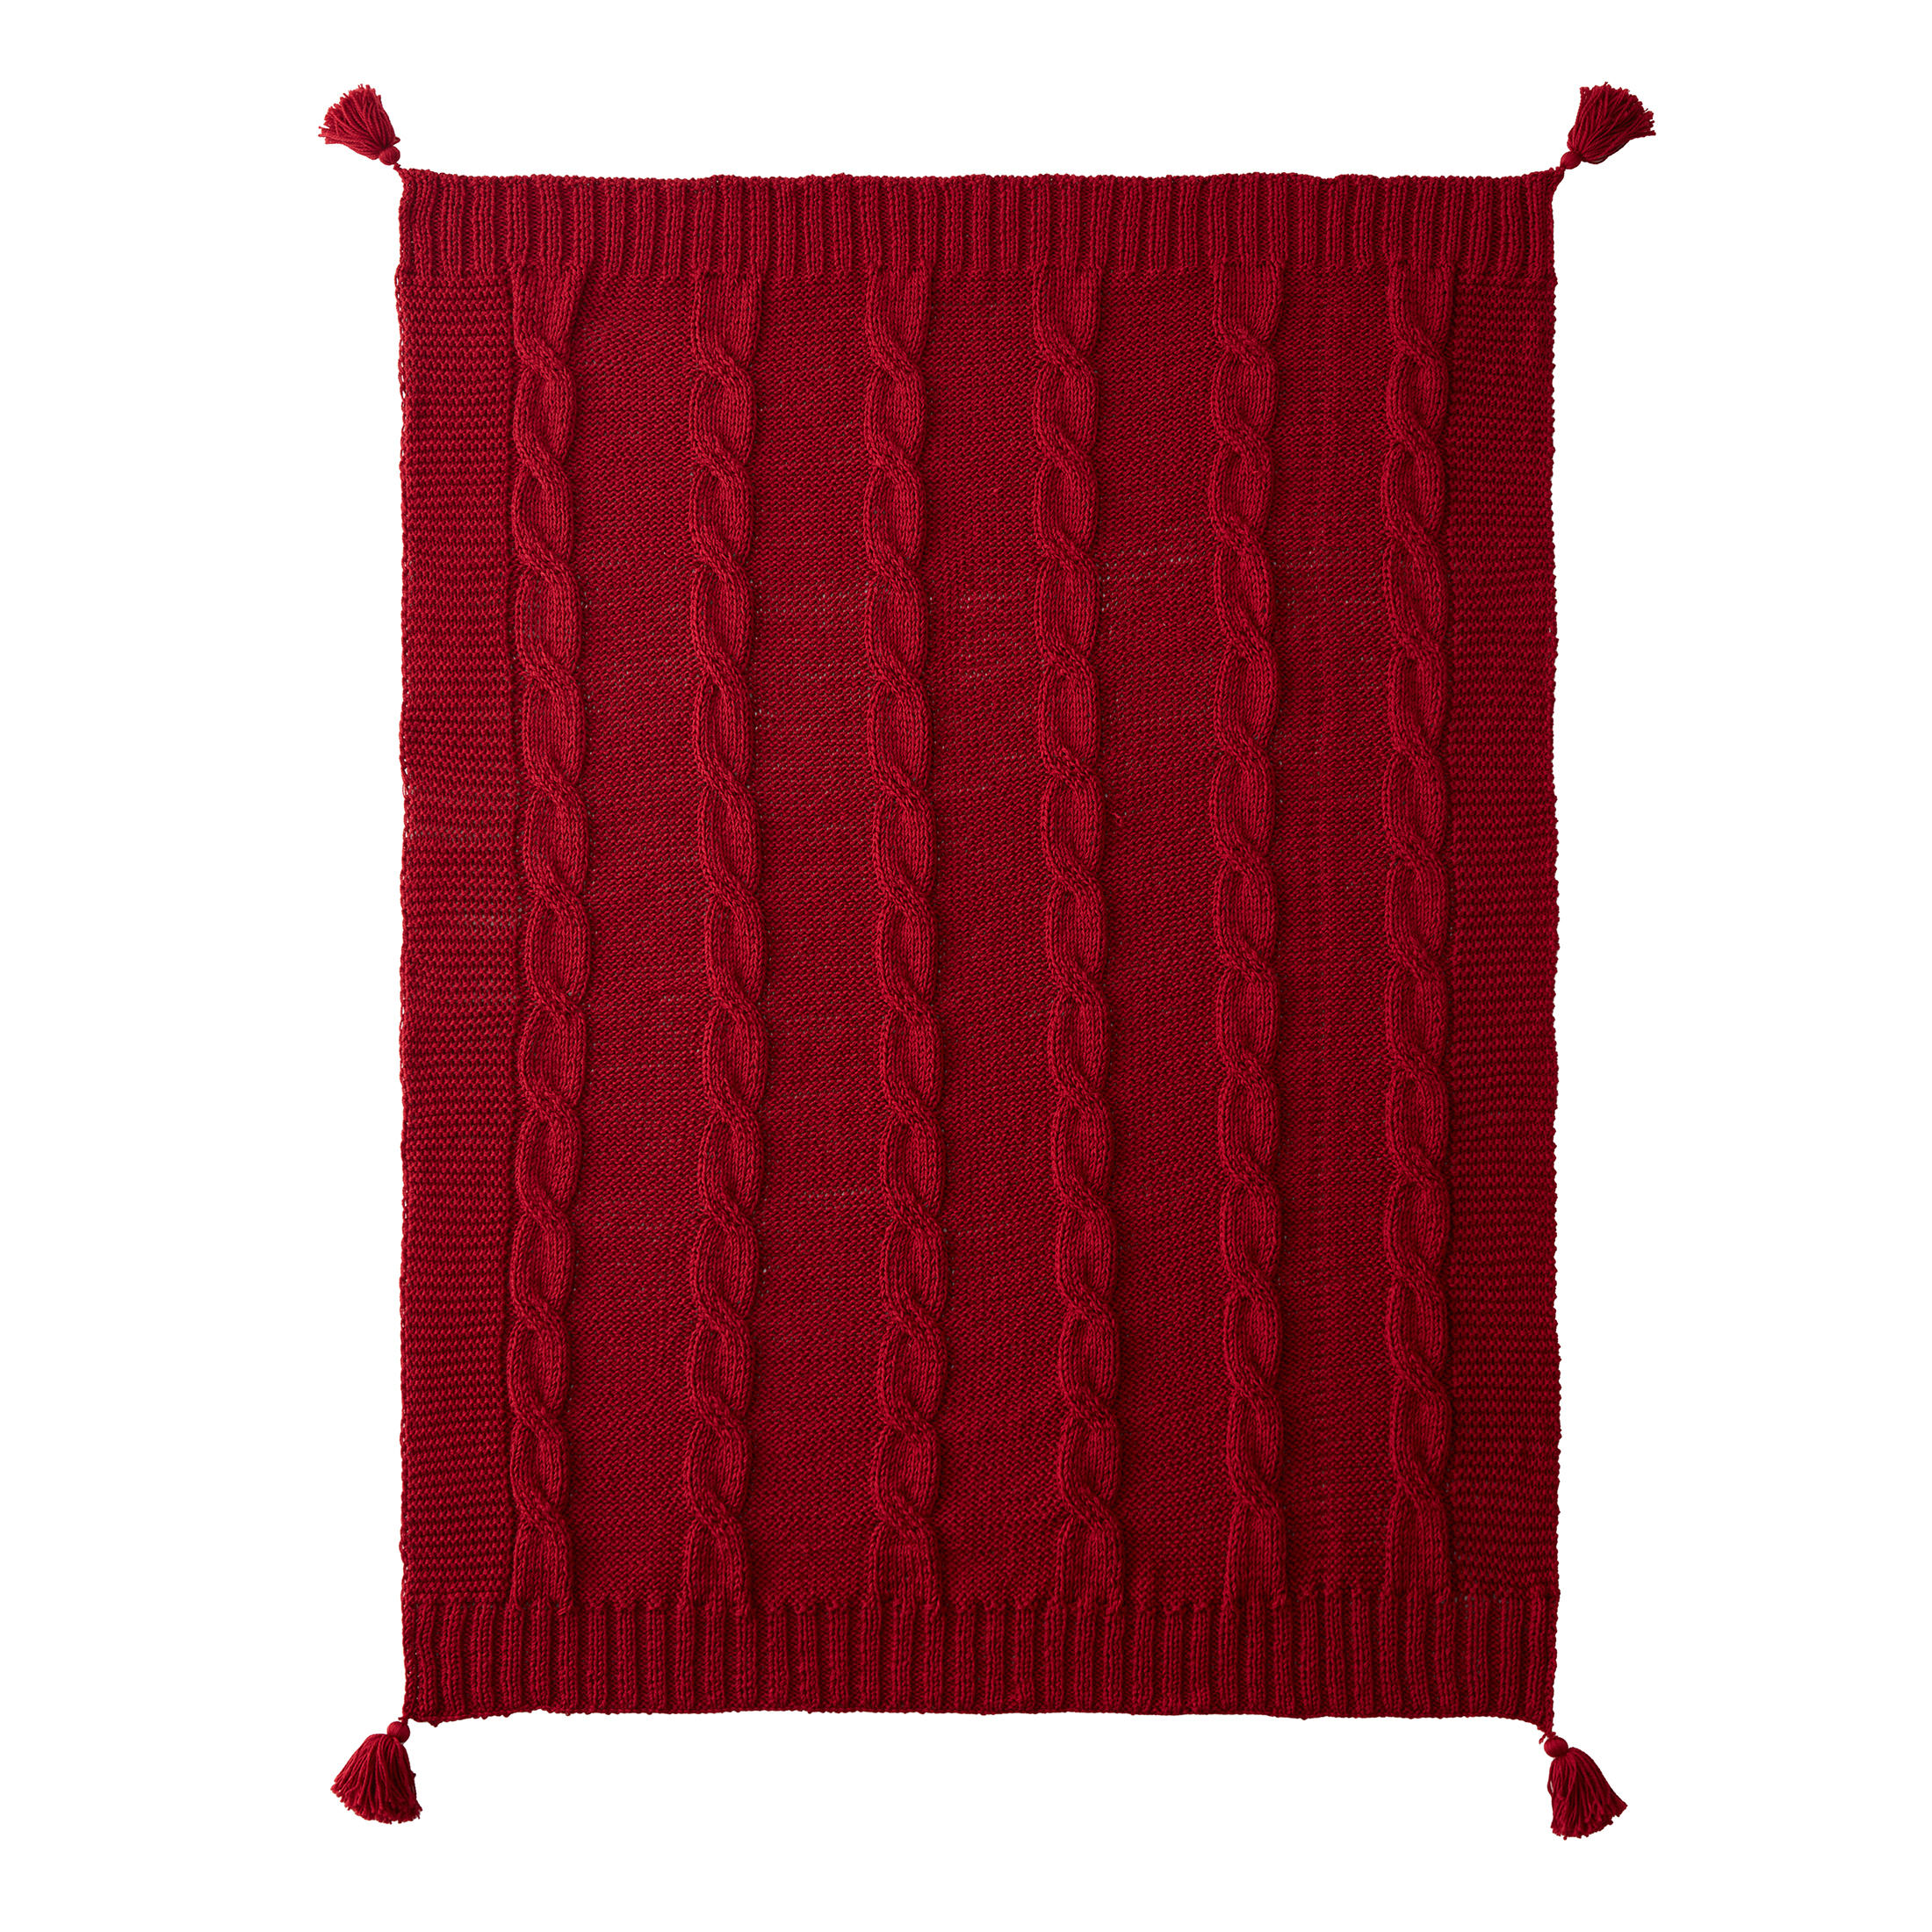 My Texas House Willow Cable Knit Cotton Throw Blanket, Red, Standard Throw - image 1 of 5